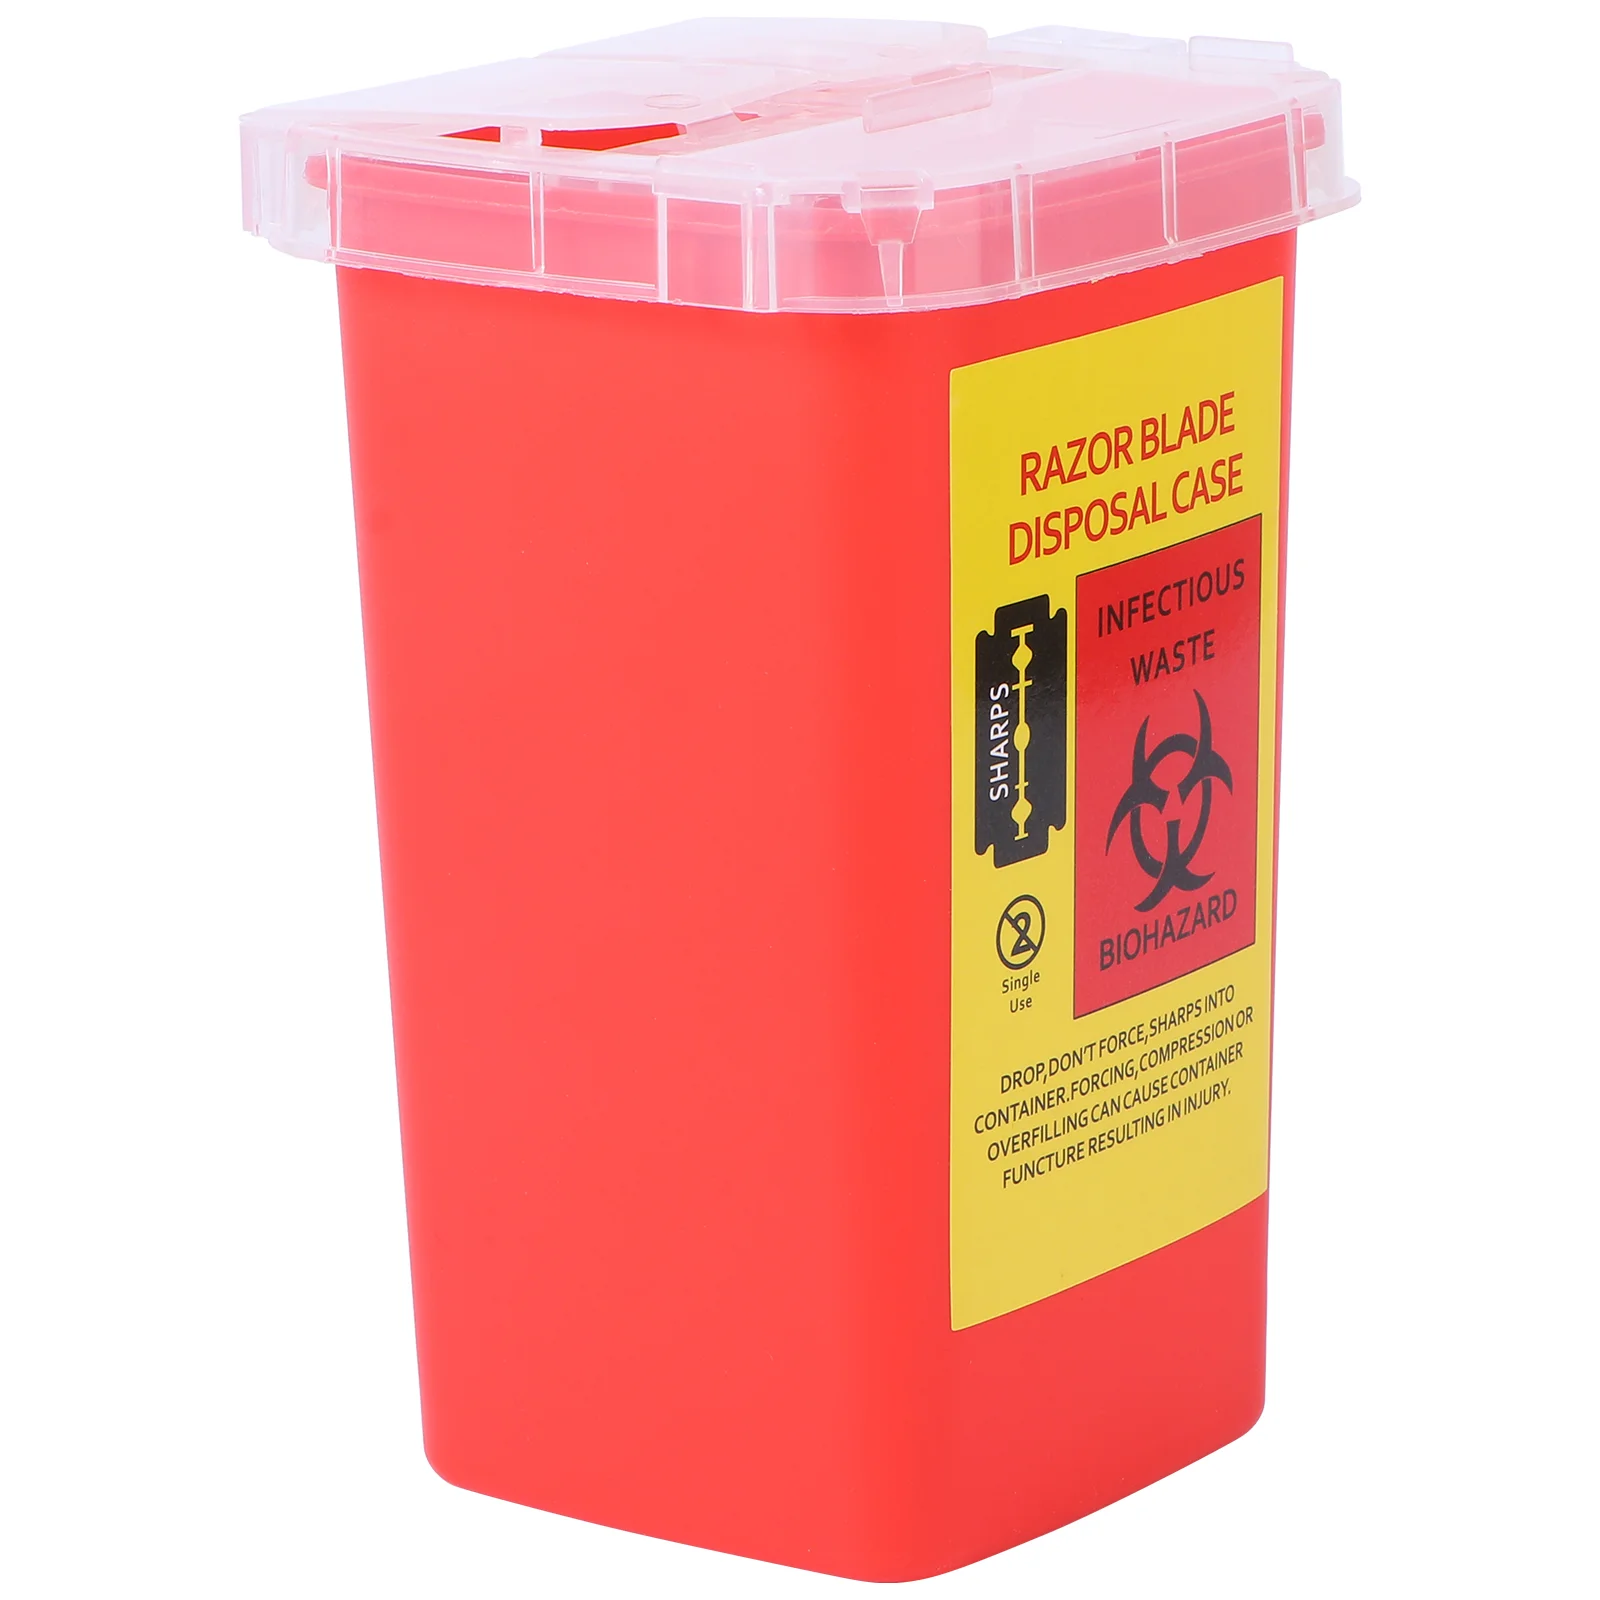 

Disposal Container Sharpscasebox Waste Bank Needle Dispenser Disposable Storage Barber Safety Syringe Trash Small Bin Recycling